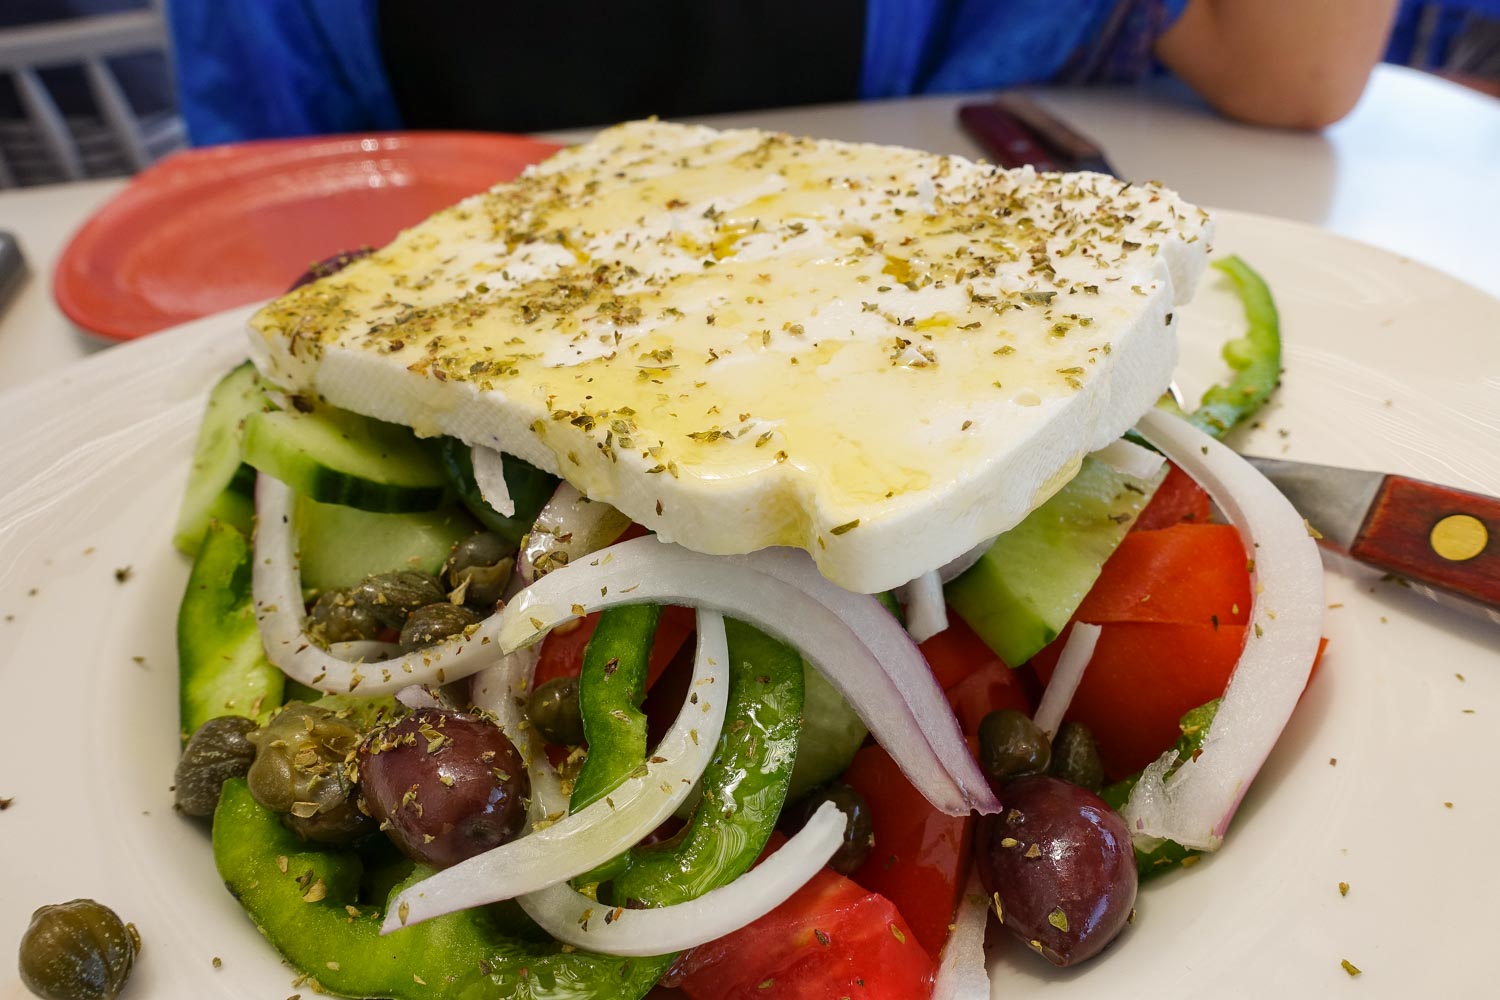 1.) Greece - You can't go wrong ordering a greek salad and a vegetarian eggplant moussaka. 